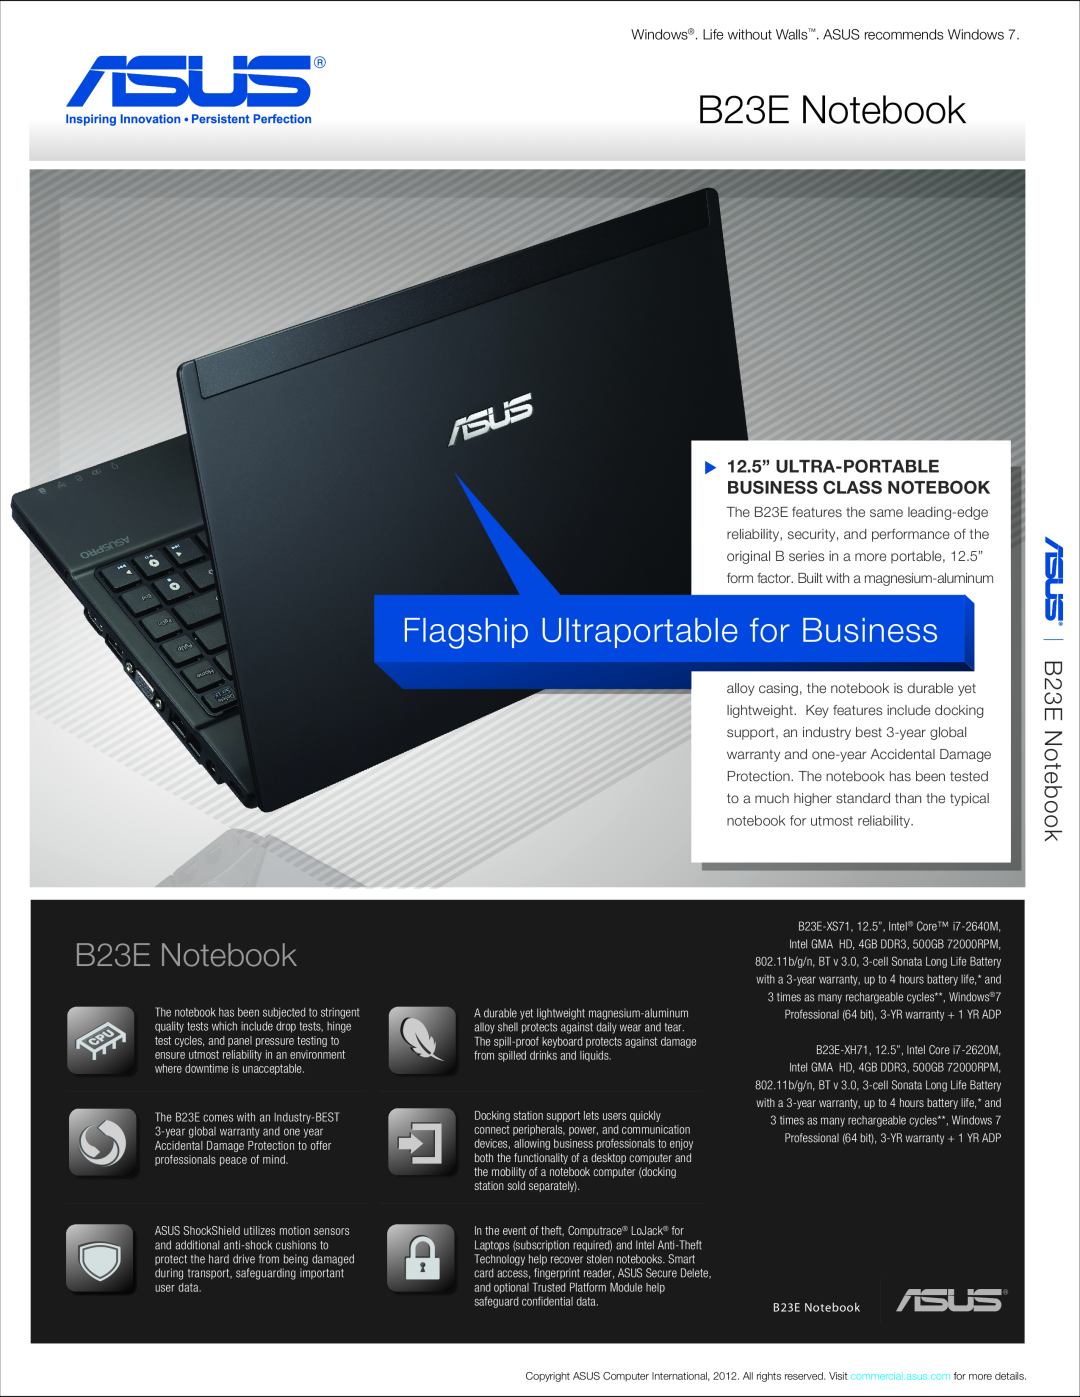 Asus B23EXH71 warranty B23E Notebook, Windows. Life without Walls. ASUS recommends Windows 